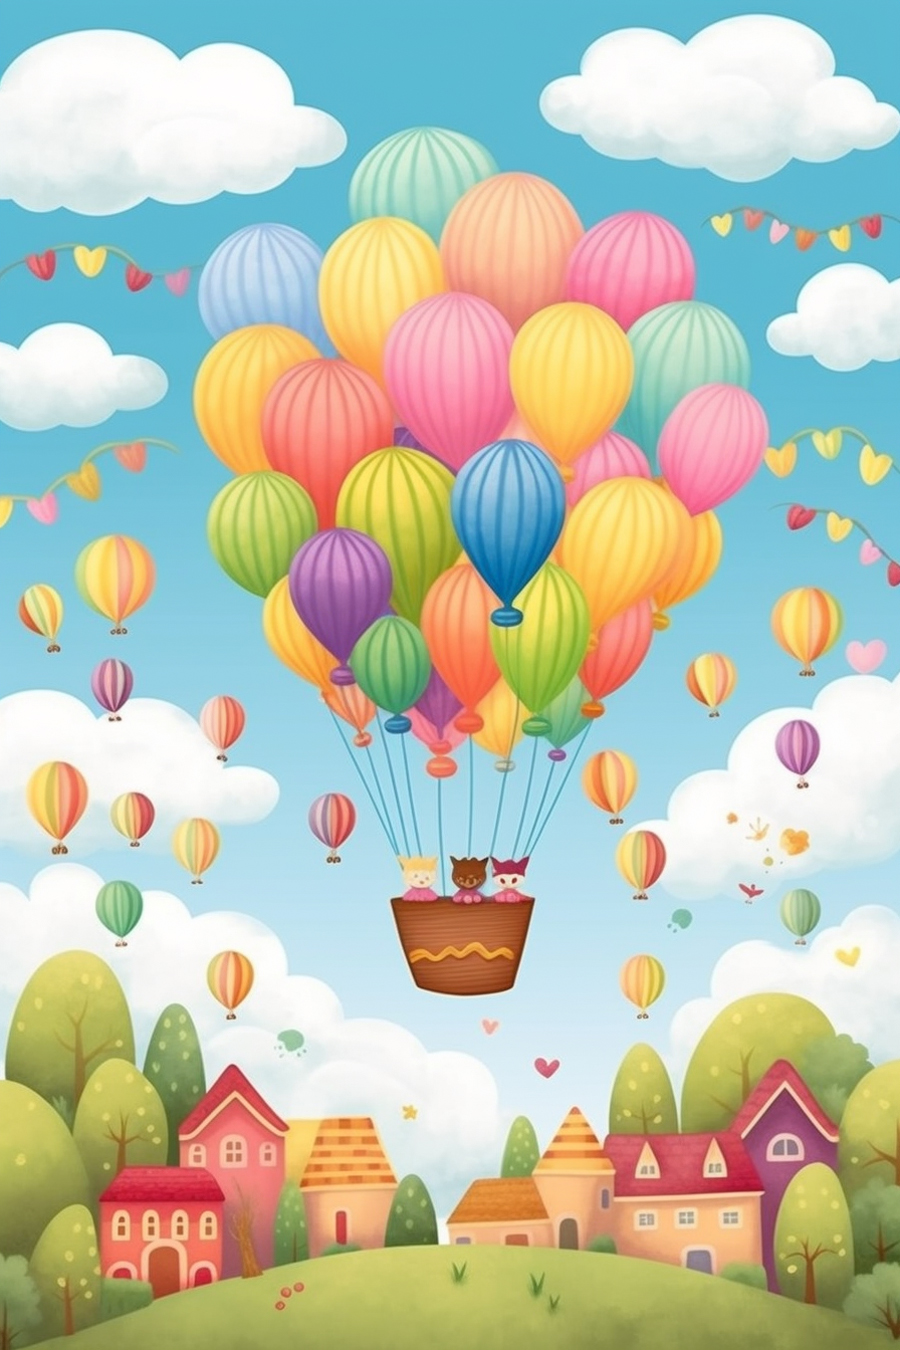 Hot air balloons flying in the sky over a village.